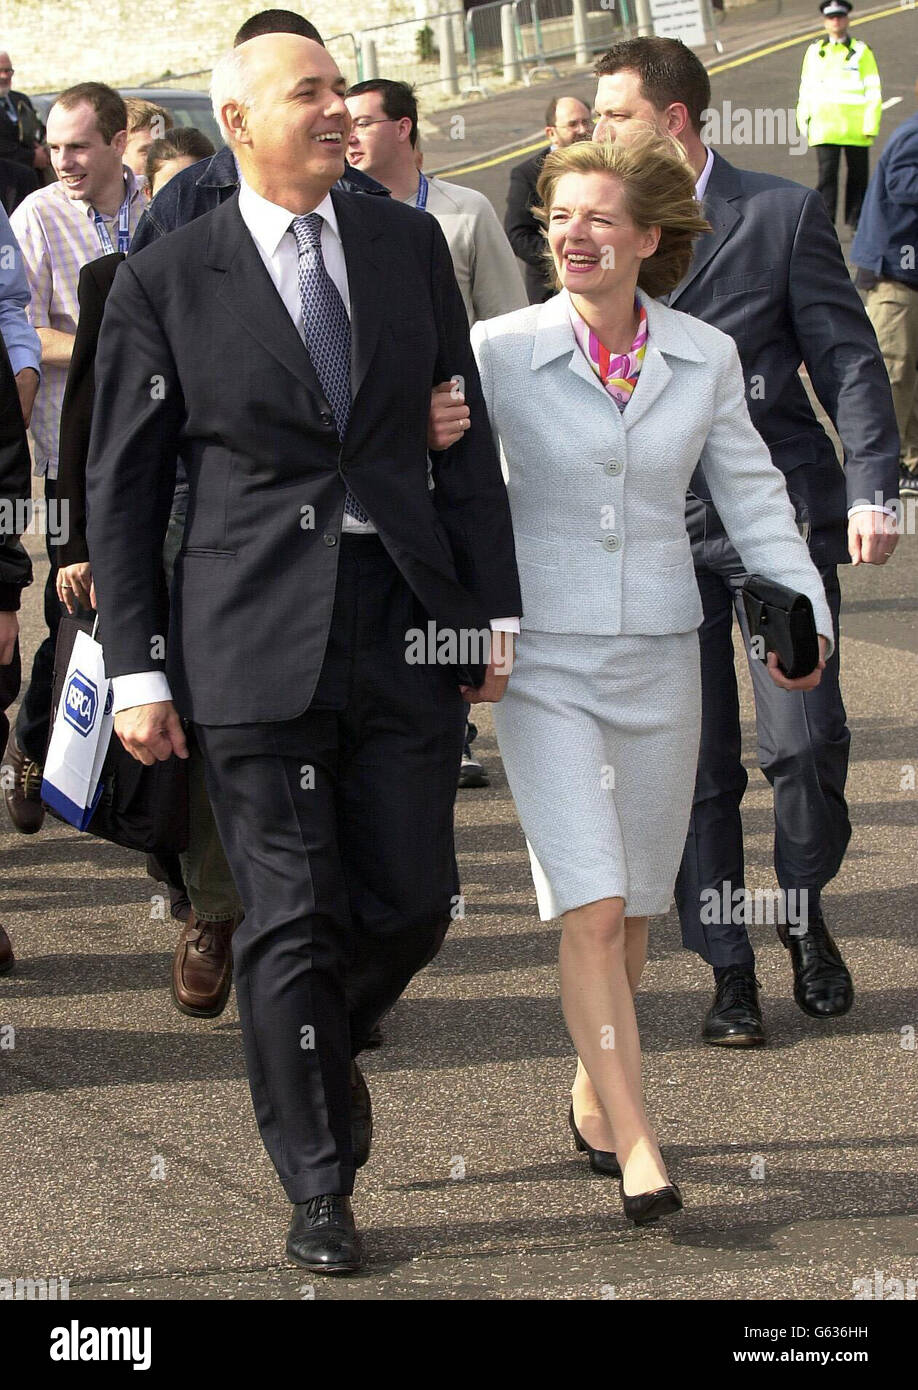 Leader of the Conservative Party Iain Duncan Smith walks with his wife Betsy from their hotel to the Conference Centre in Bournemouth. Stock Photo